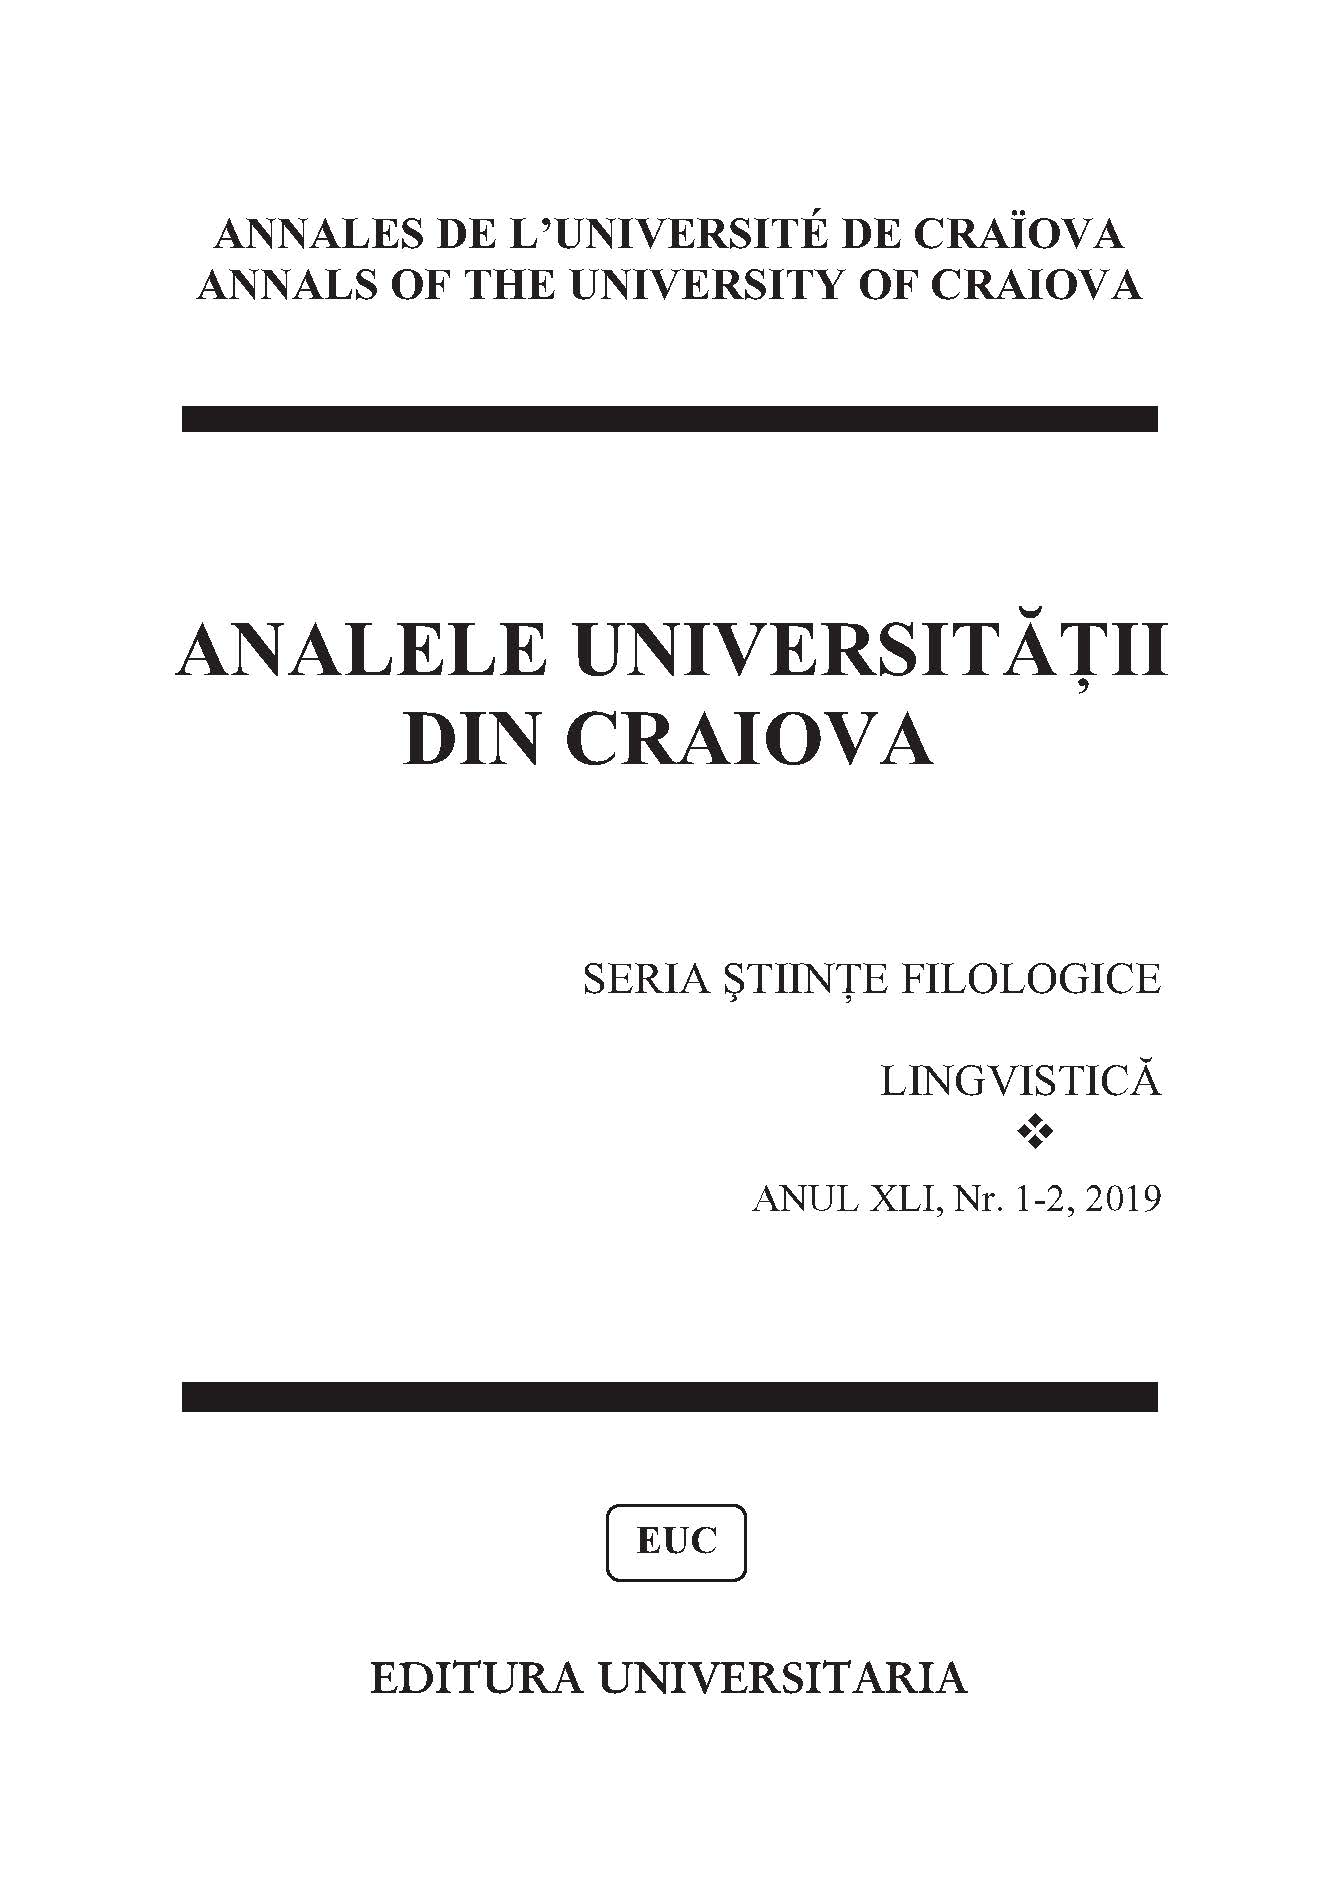 Studies on Dongba and Daba Oral Traditions: Achievements and Future Perspectives